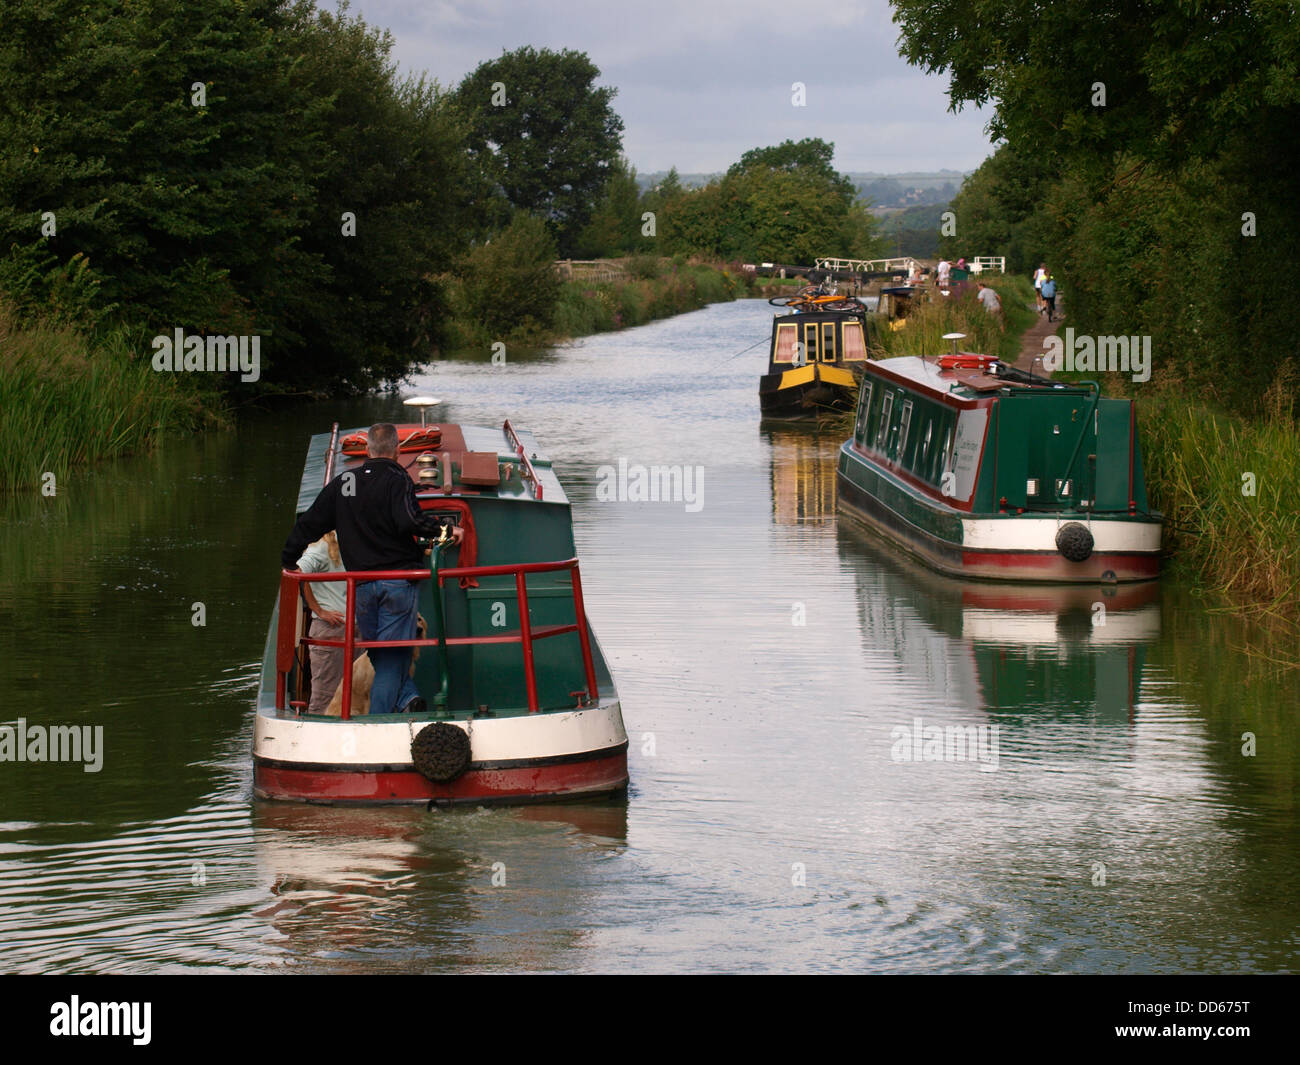 Wilts and Berks Canal, Semington, Wiltshire, UK 2013 Stock Photo